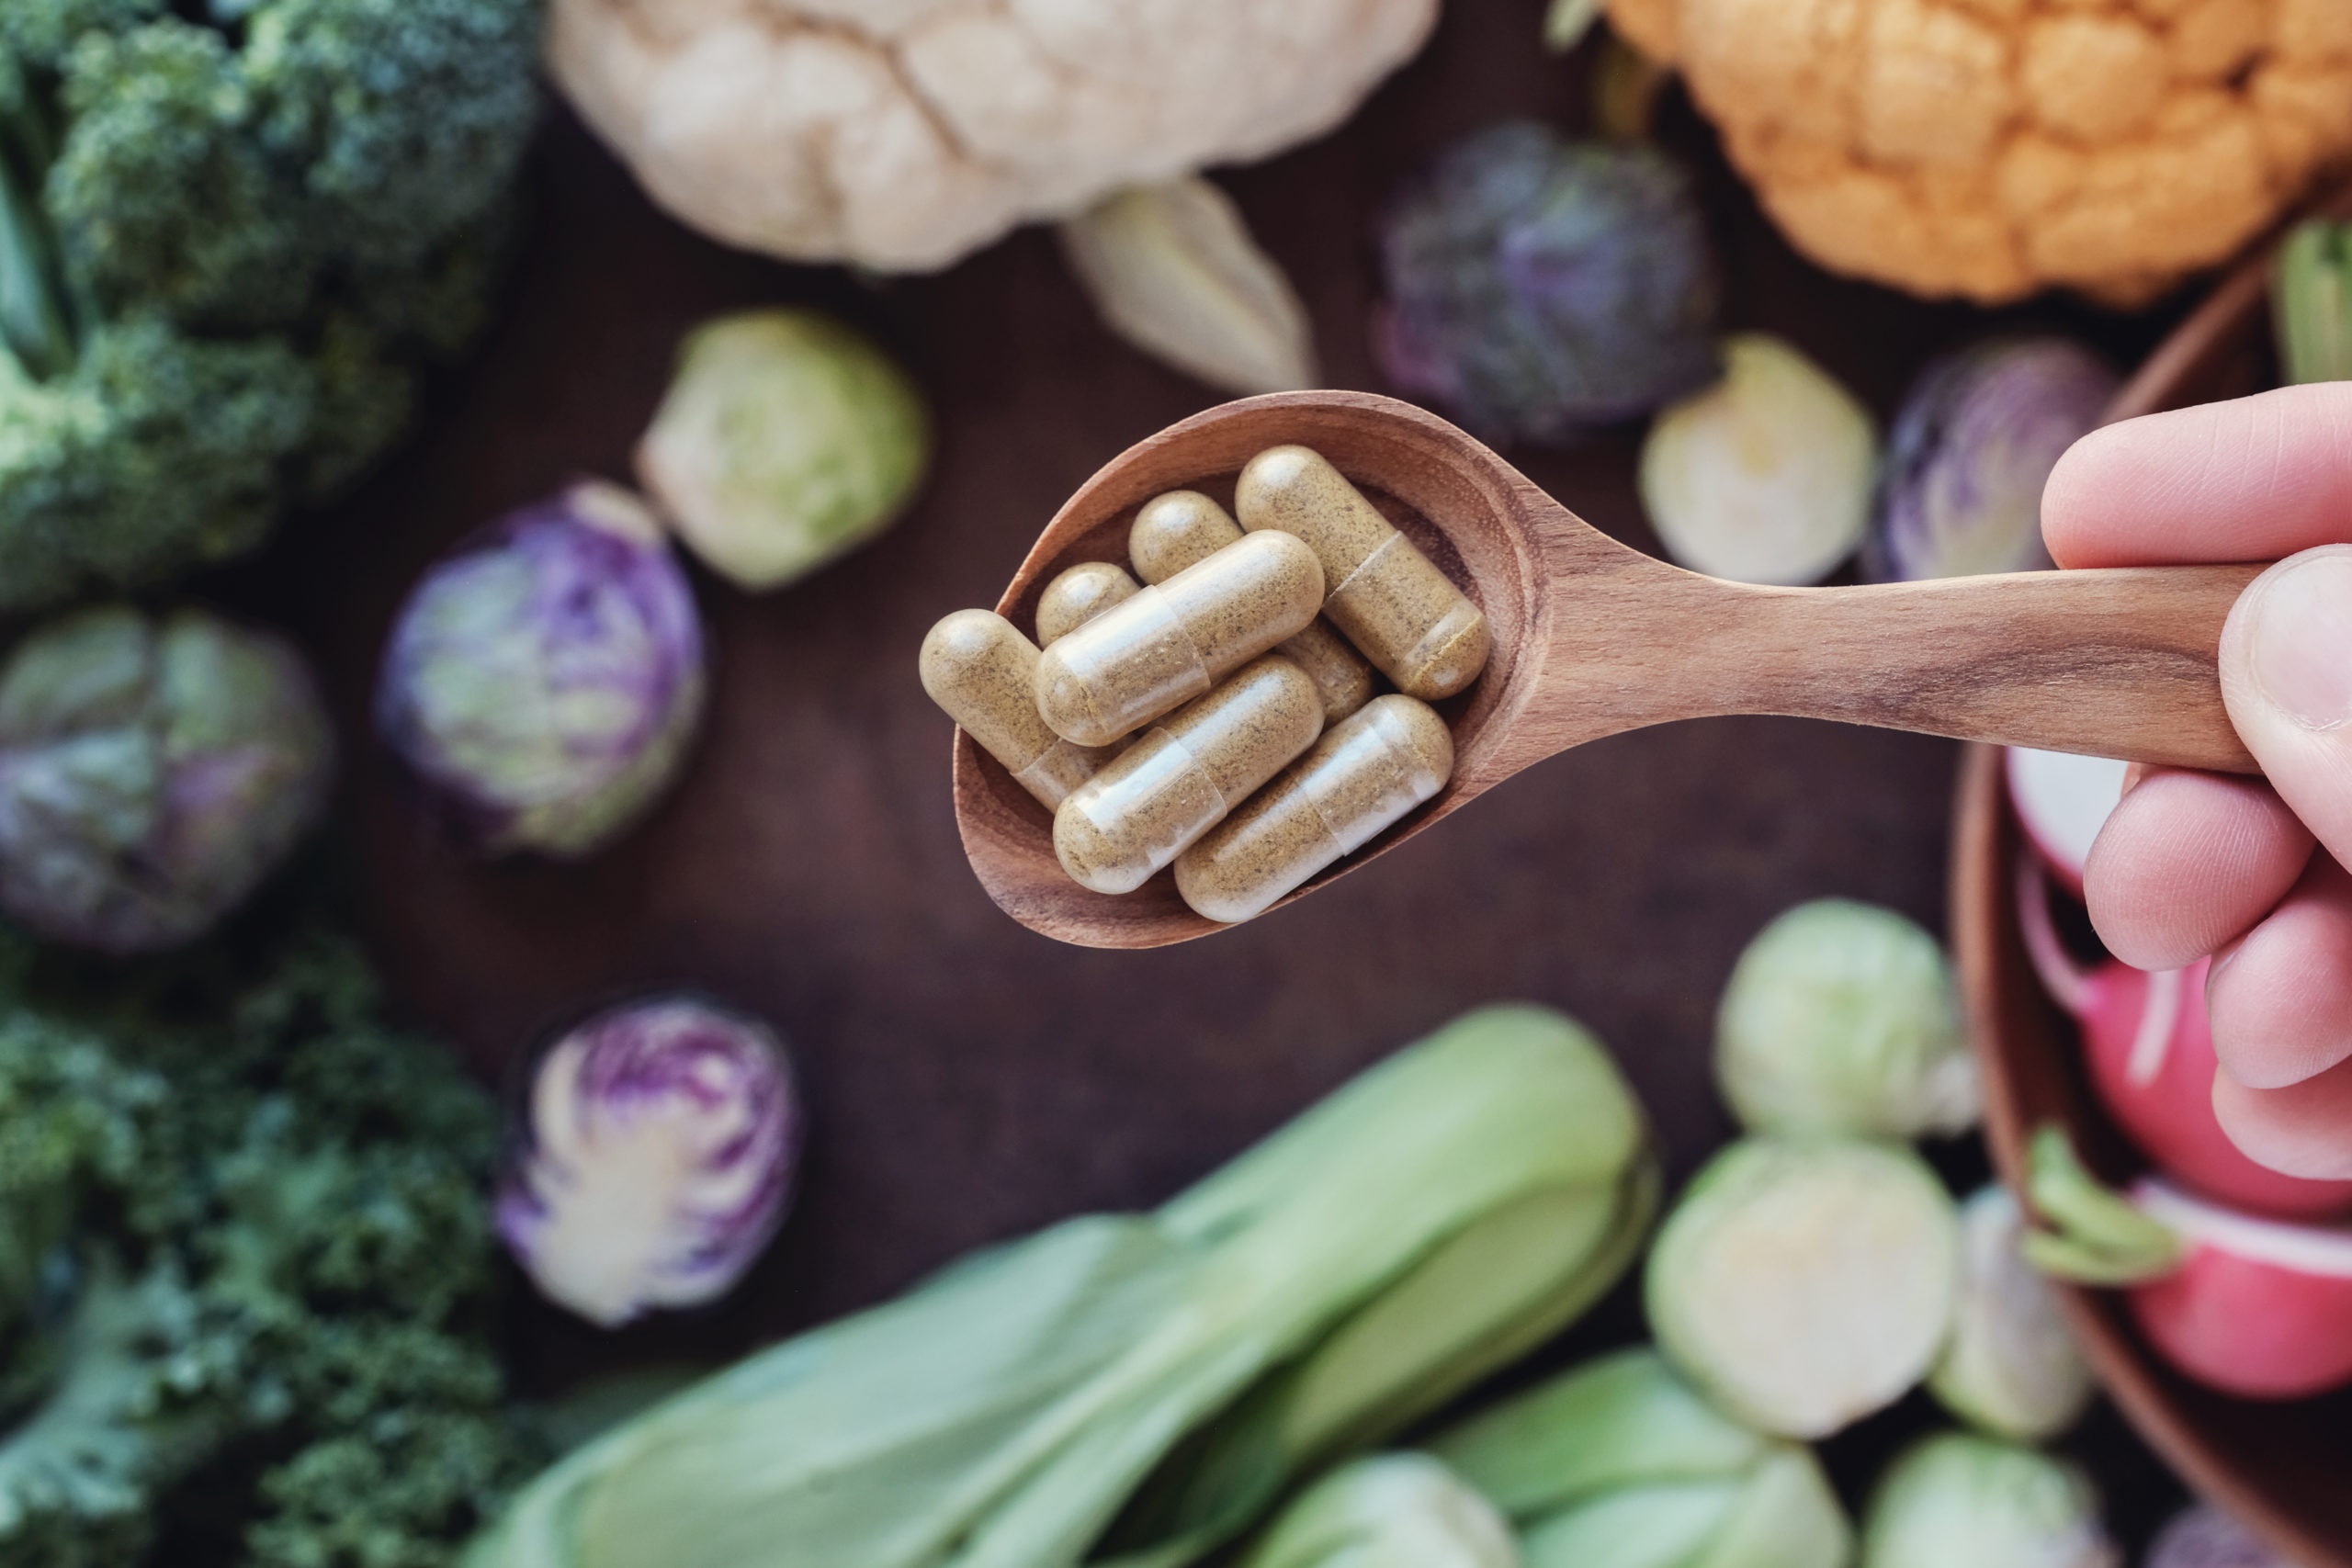 Supplement Use Is On the Rise. Here’s Why